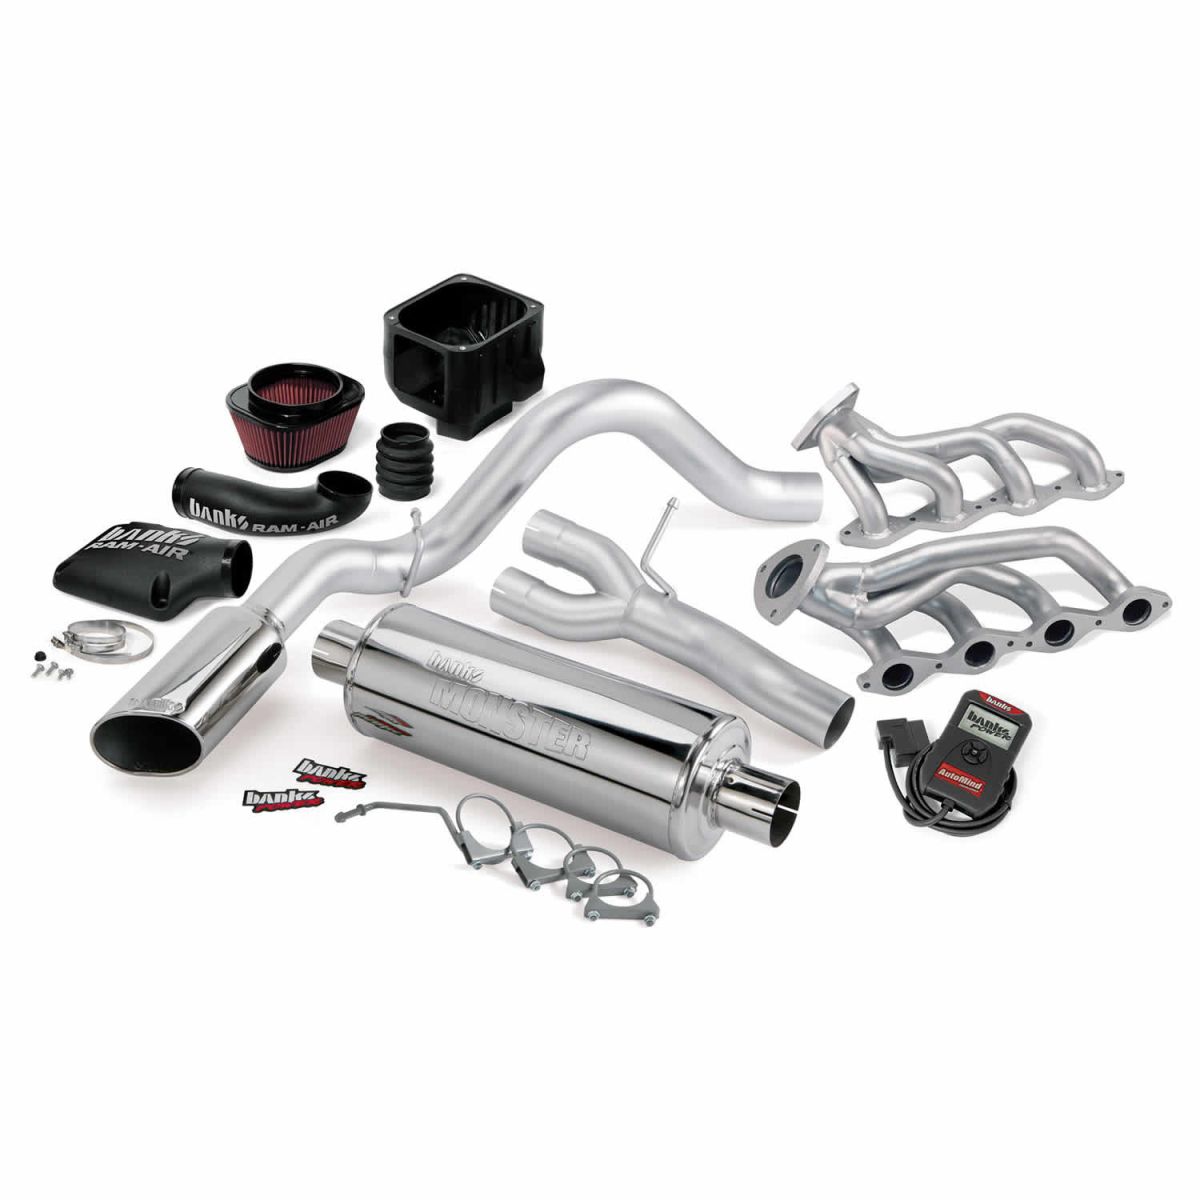 Banks Power - Banks Power PowerPack Bundle Complete Power System W/AutoMind Programmer Chrome Tailpipe 09 Chevy 5.3L CCSB-ECSB FFV Flex-Fuel Vehicle